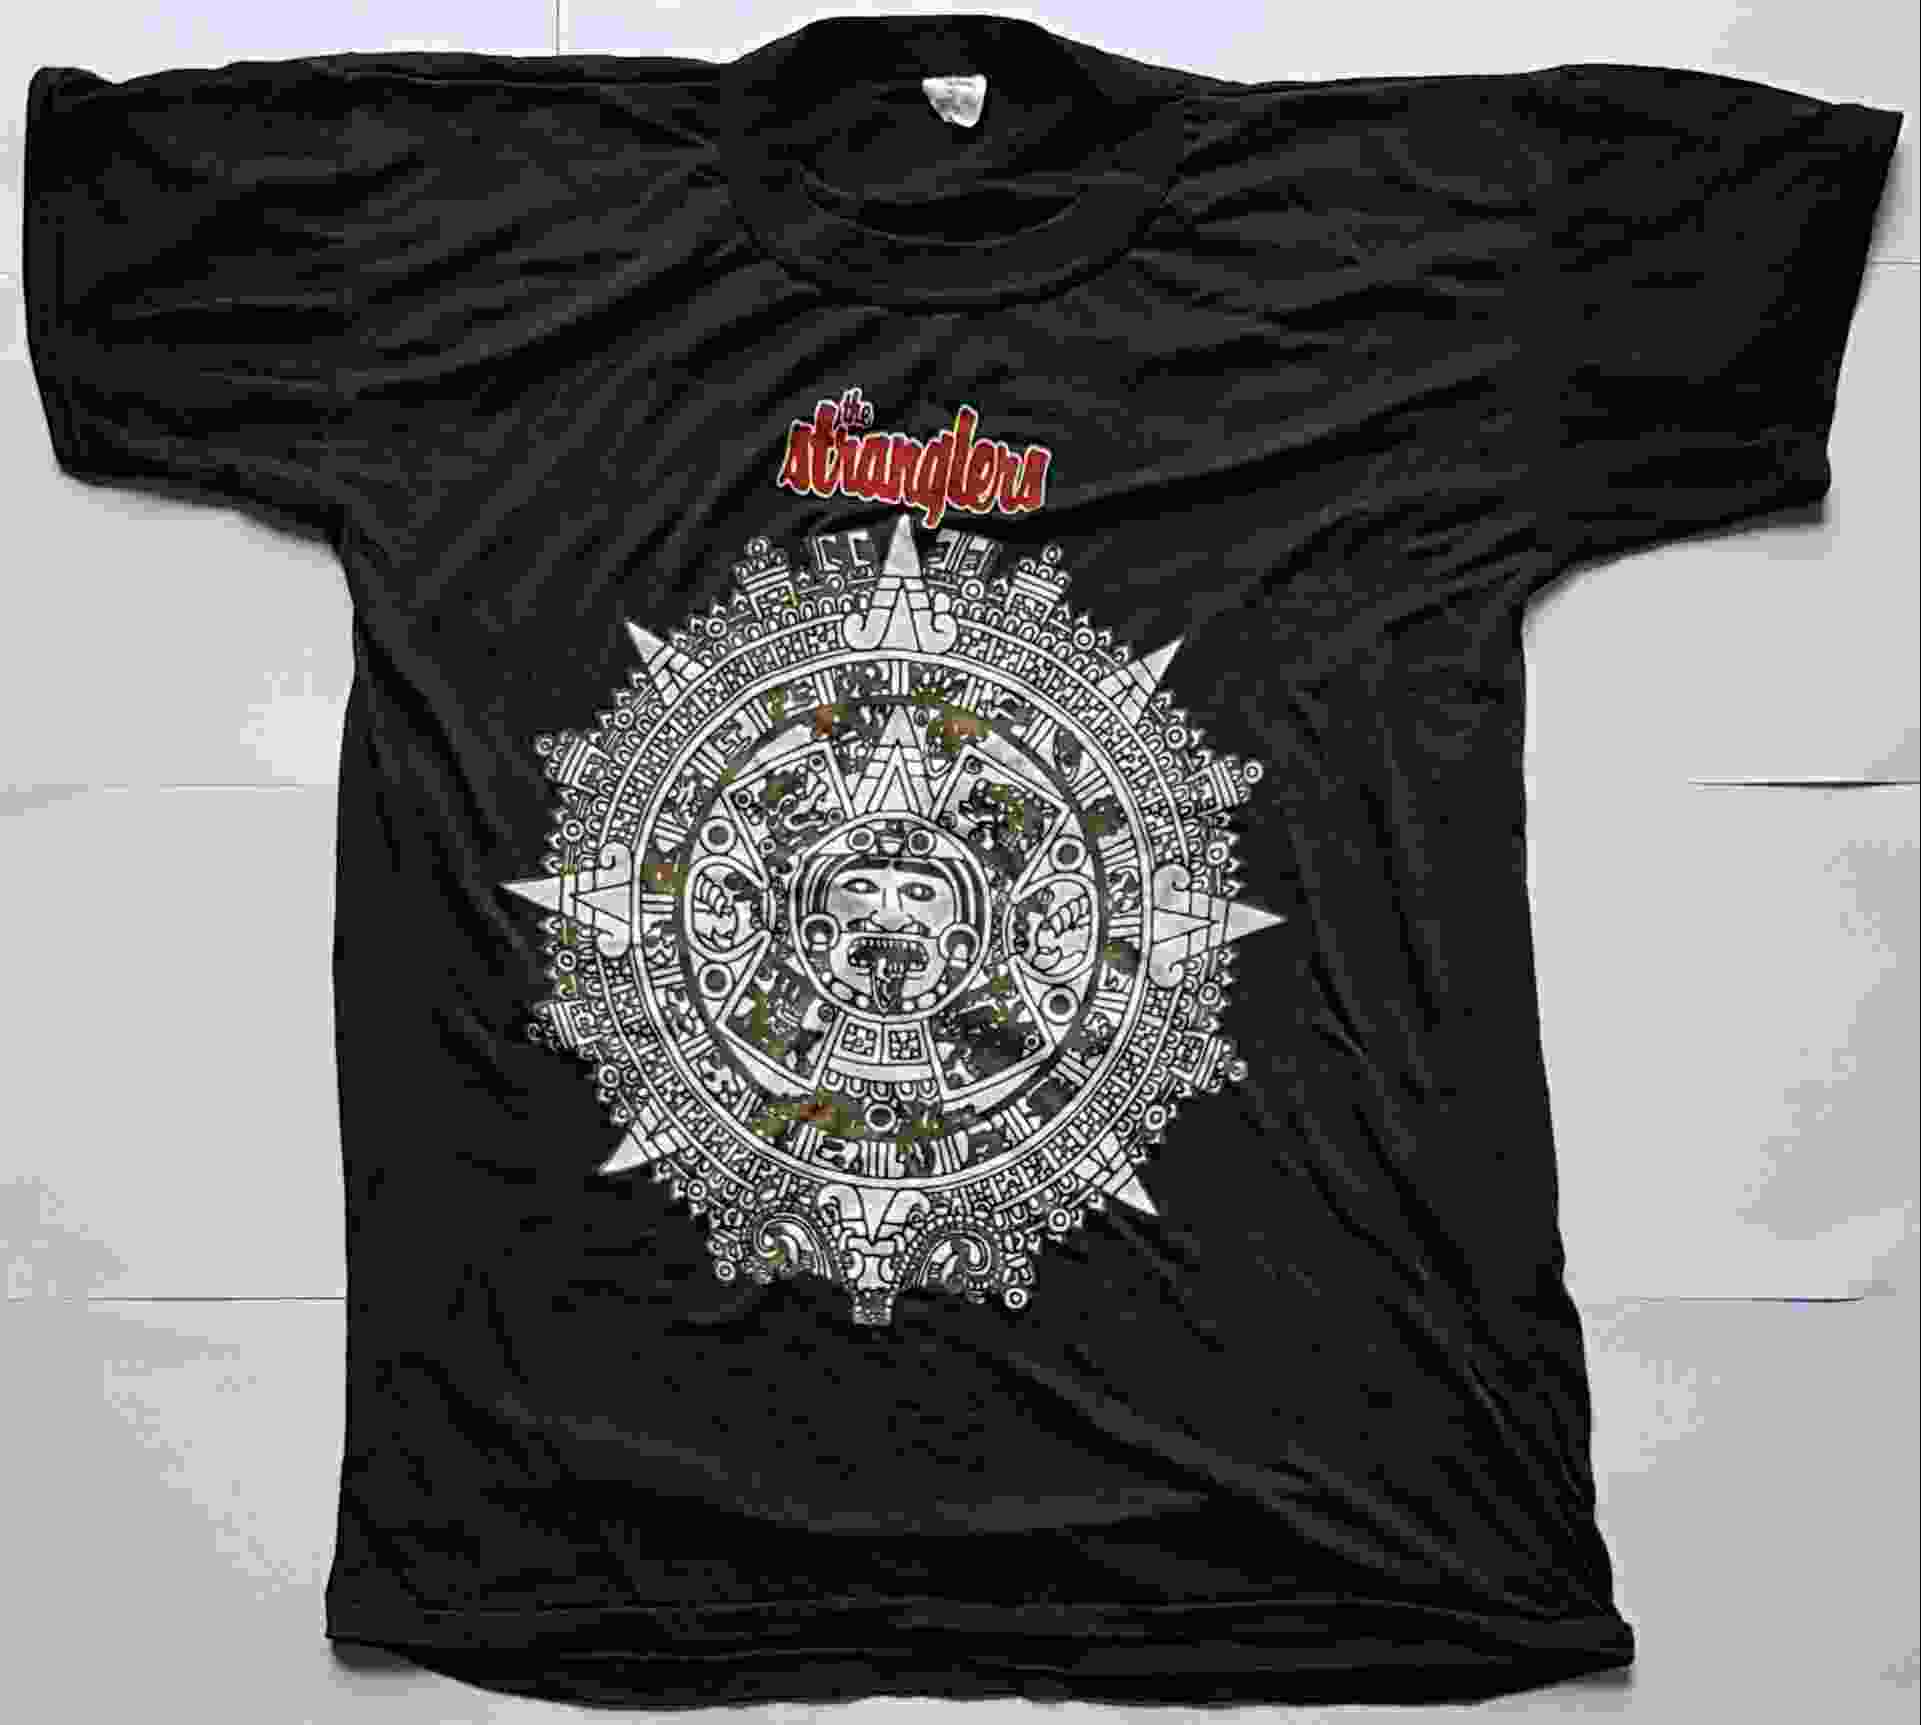 Picture of TS-TS-ATS Dreamtime U.K. tour by artist The Stranglers from The Stranglers clothes